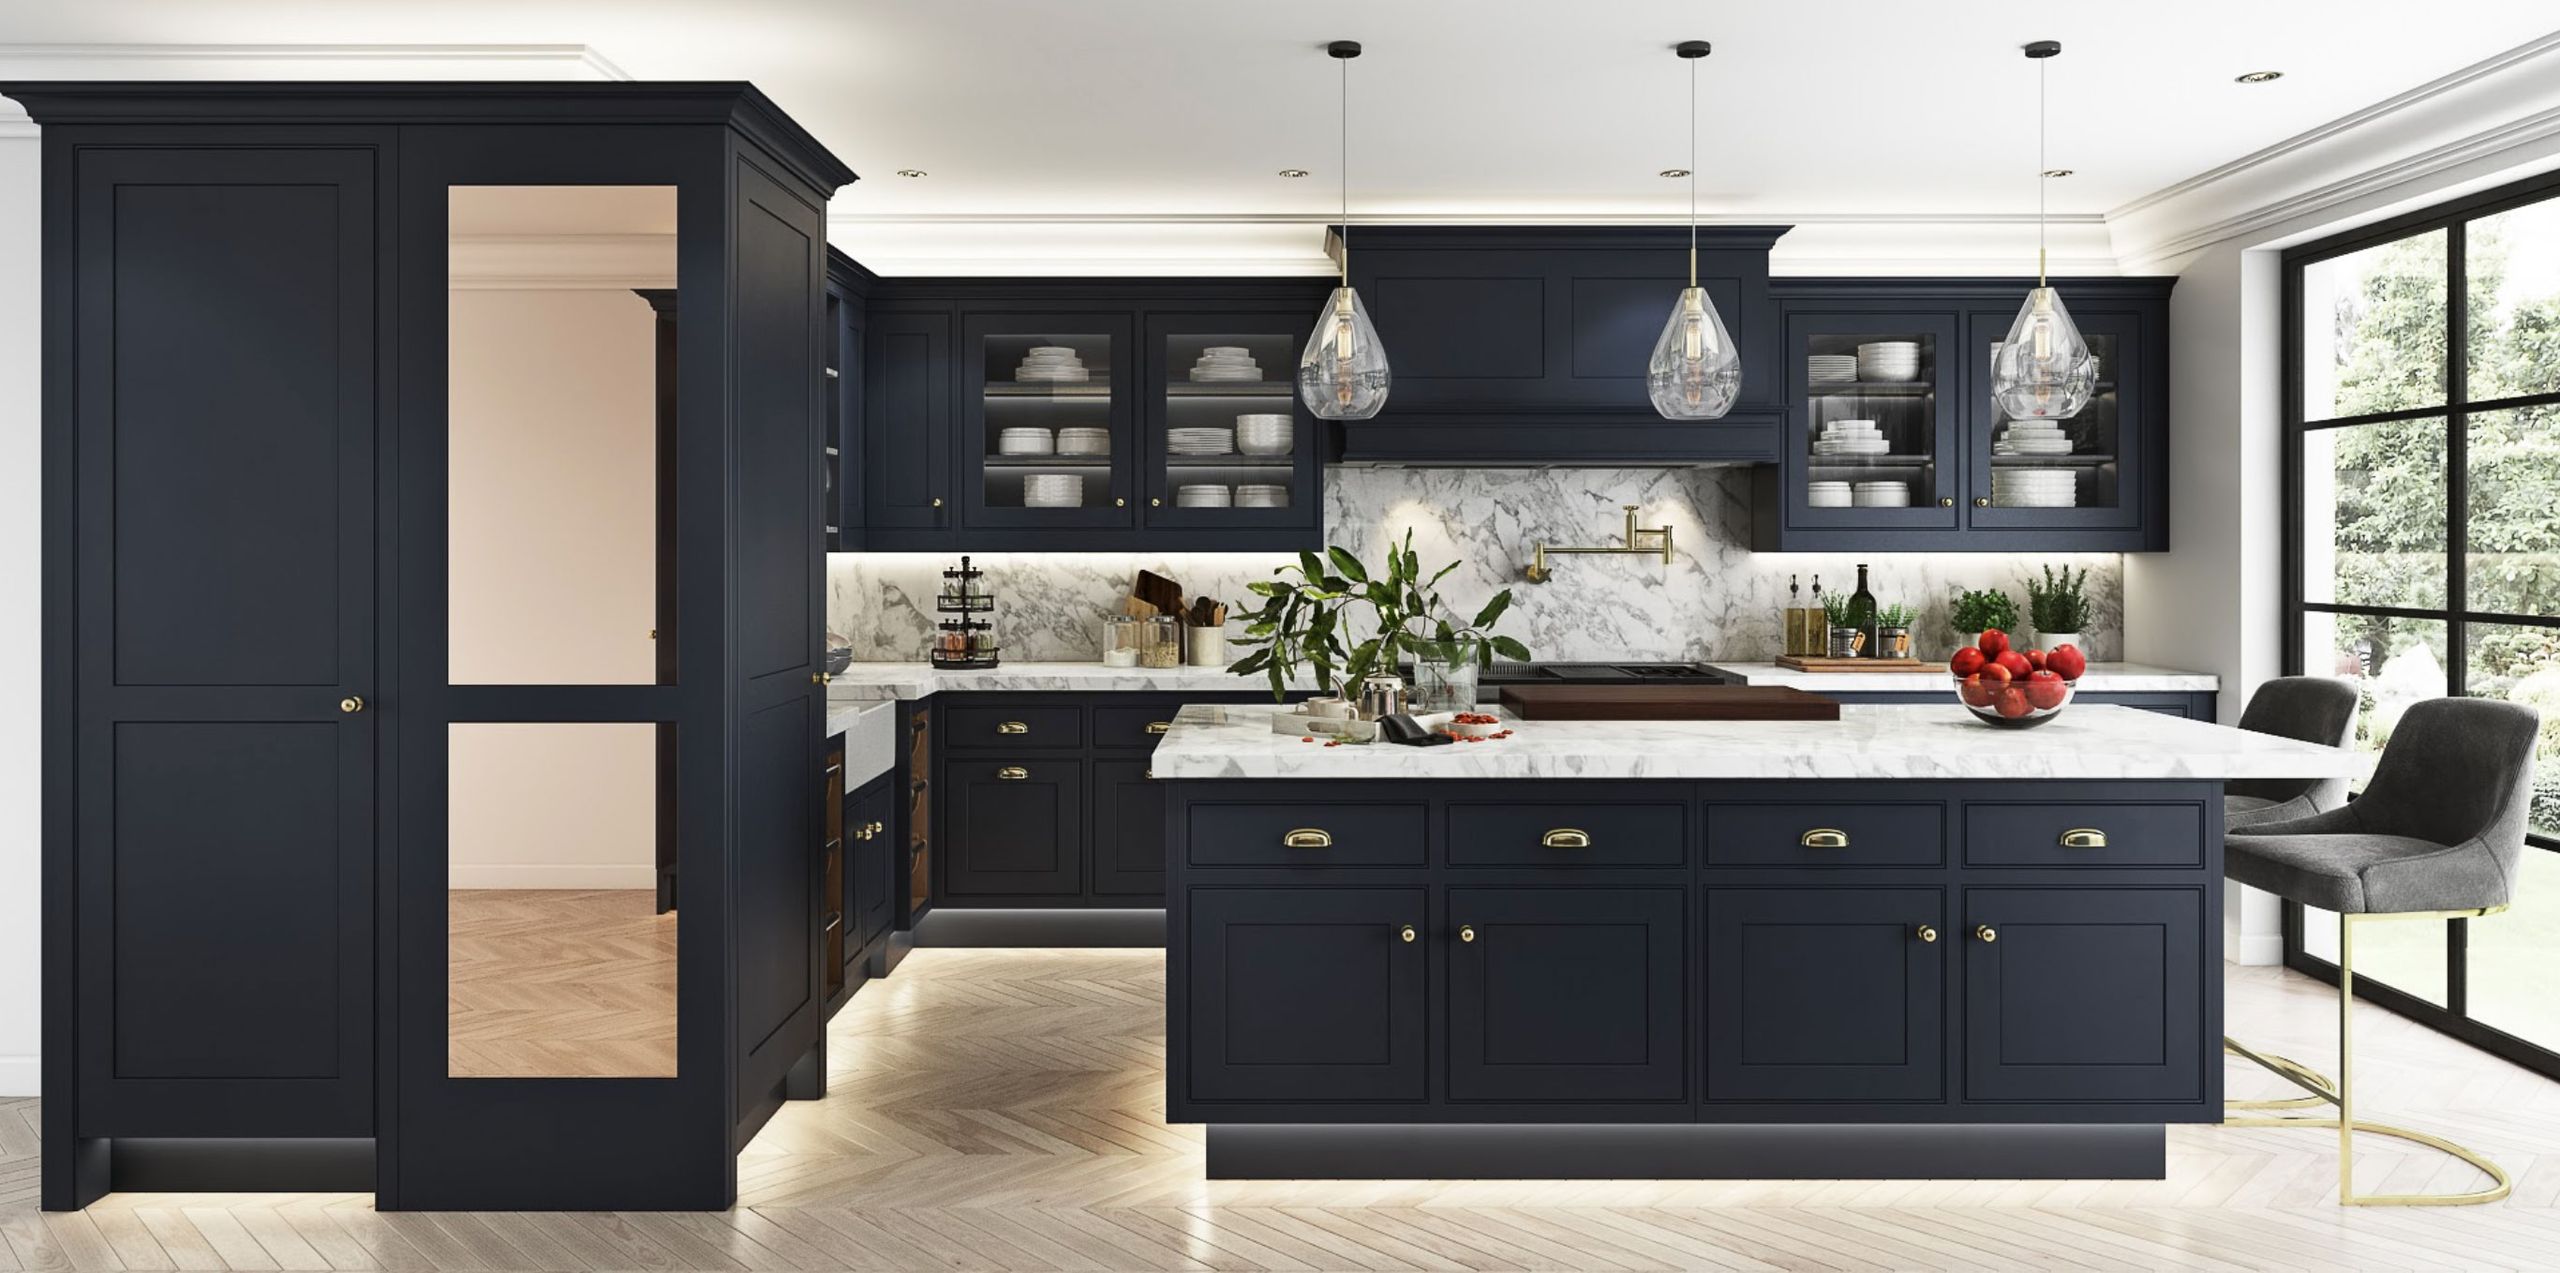 How to design a kitchen – expert kitchen planning guide | Homes & Gardens